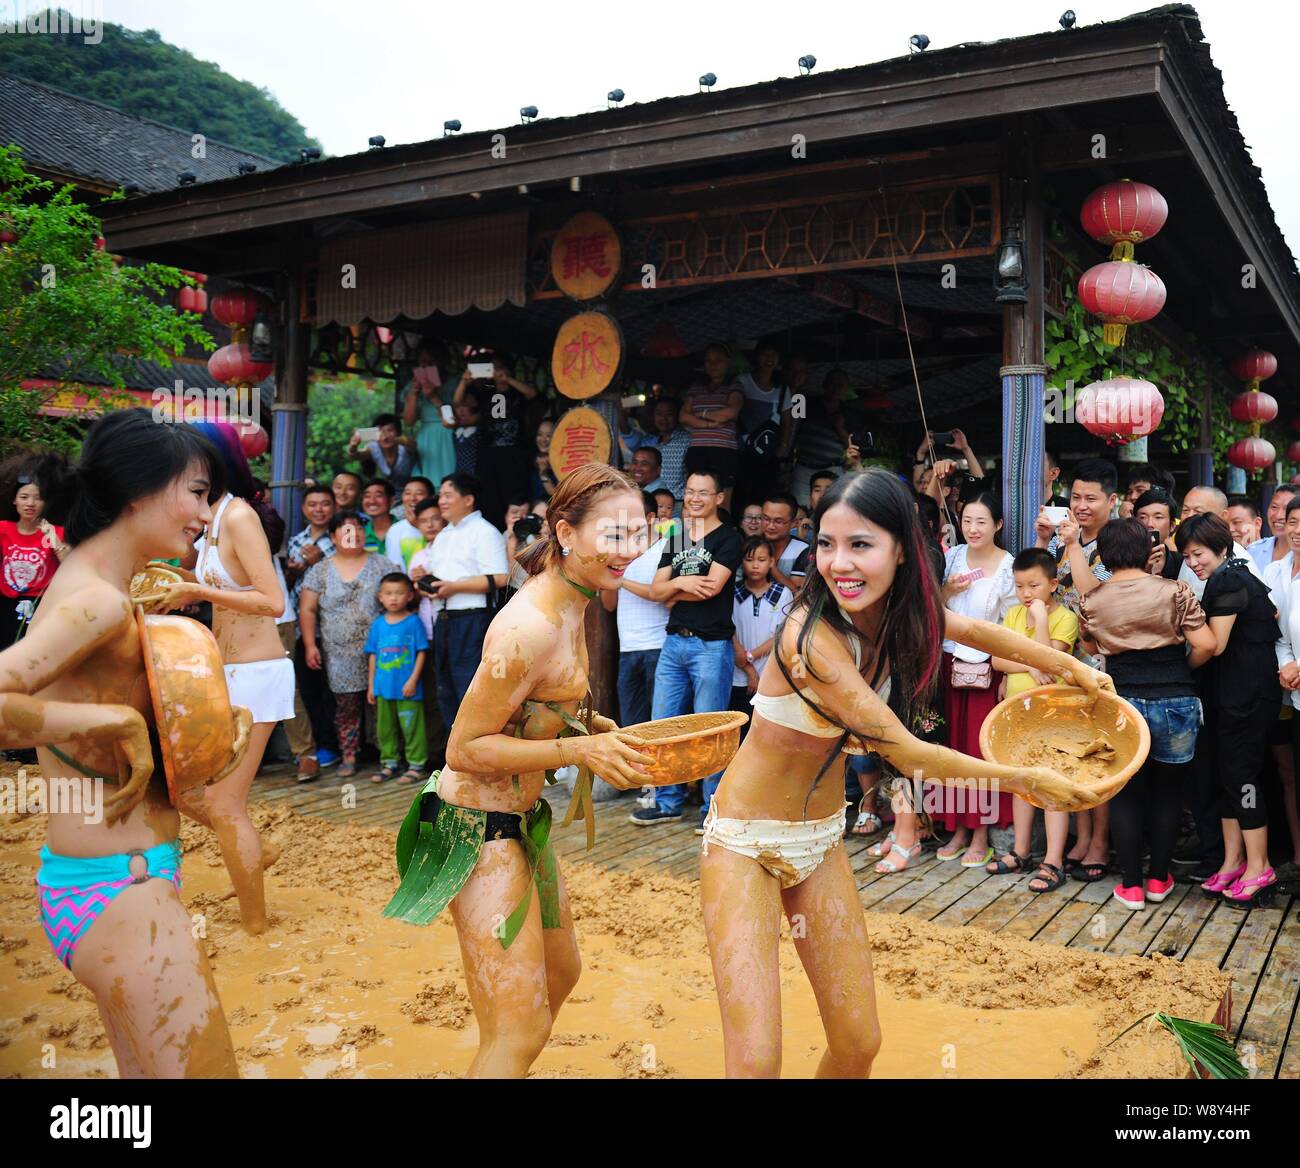 Bikini-dressed women have fun at a mud-wrestling event in a scenic area of Wulingyuan in Zhangjiajie city, central Chinas Hunan province, 10 September Stock Photo